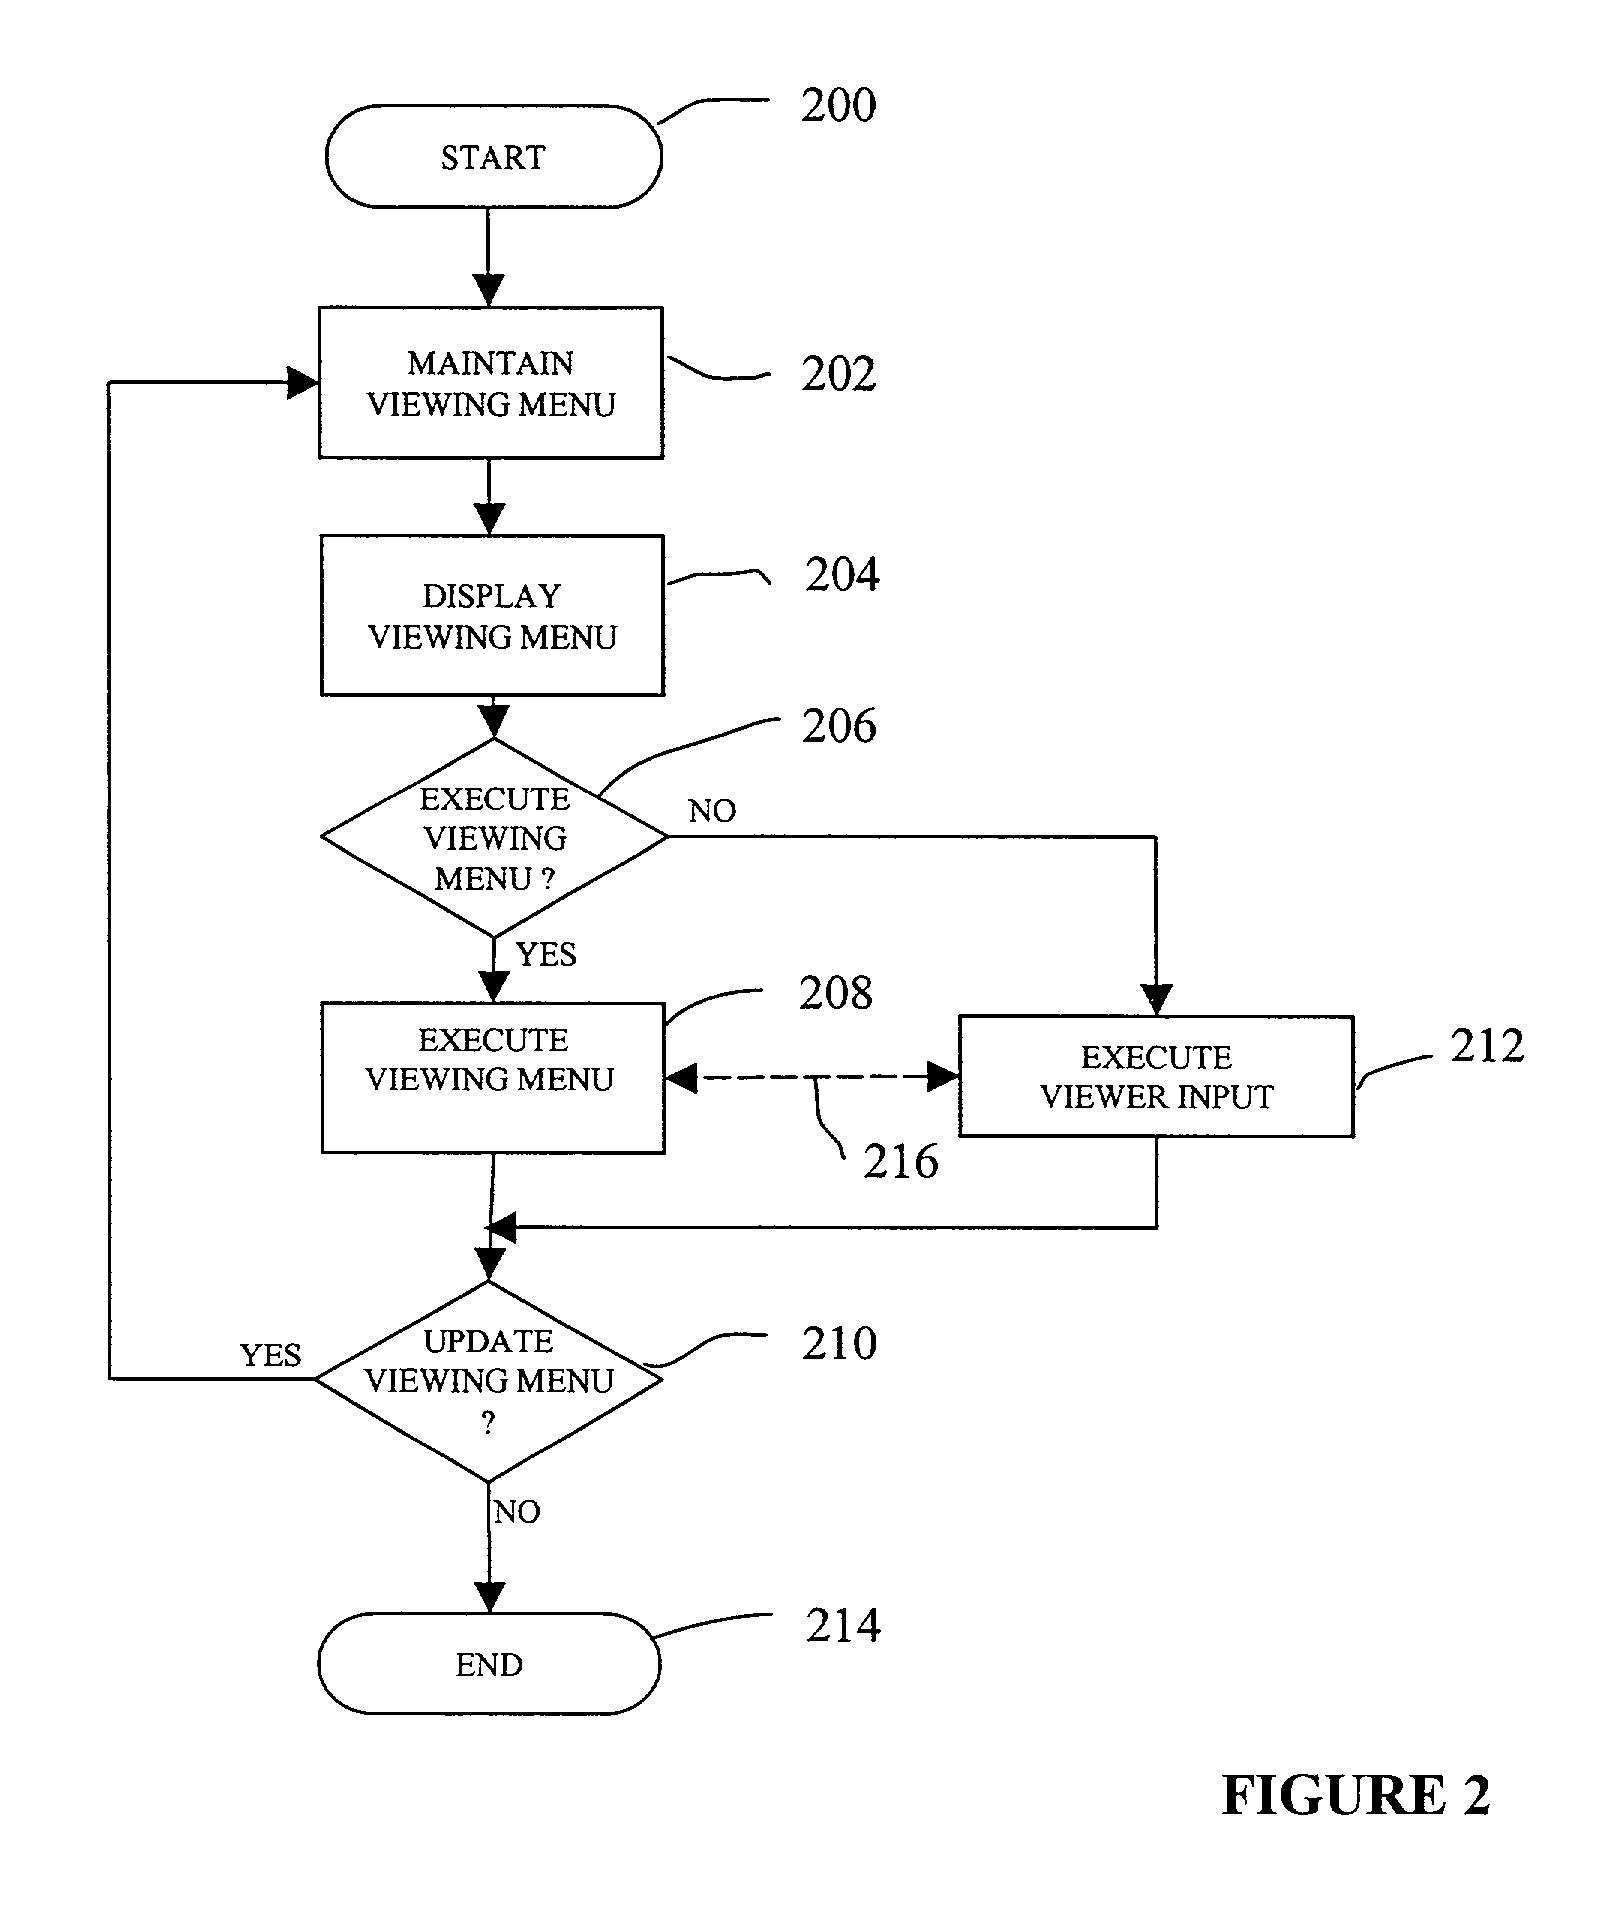 Personal video recorder and method enabling a history pull down function for program selection